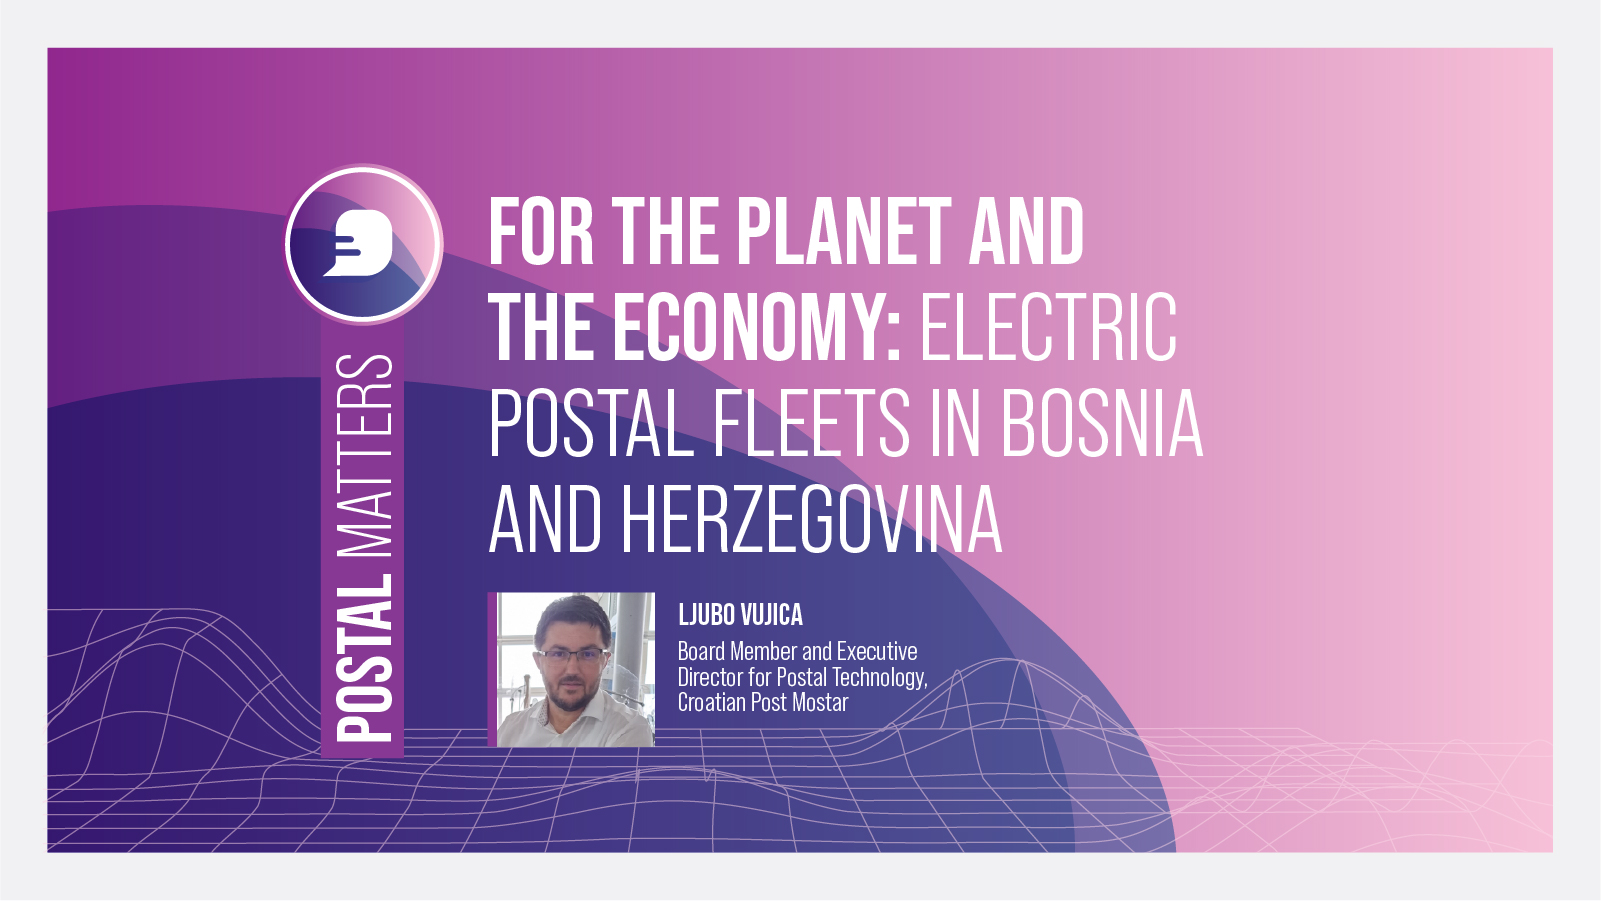 For the planet and the economy: Electric postal fleets in Bosnia and Herzegovina